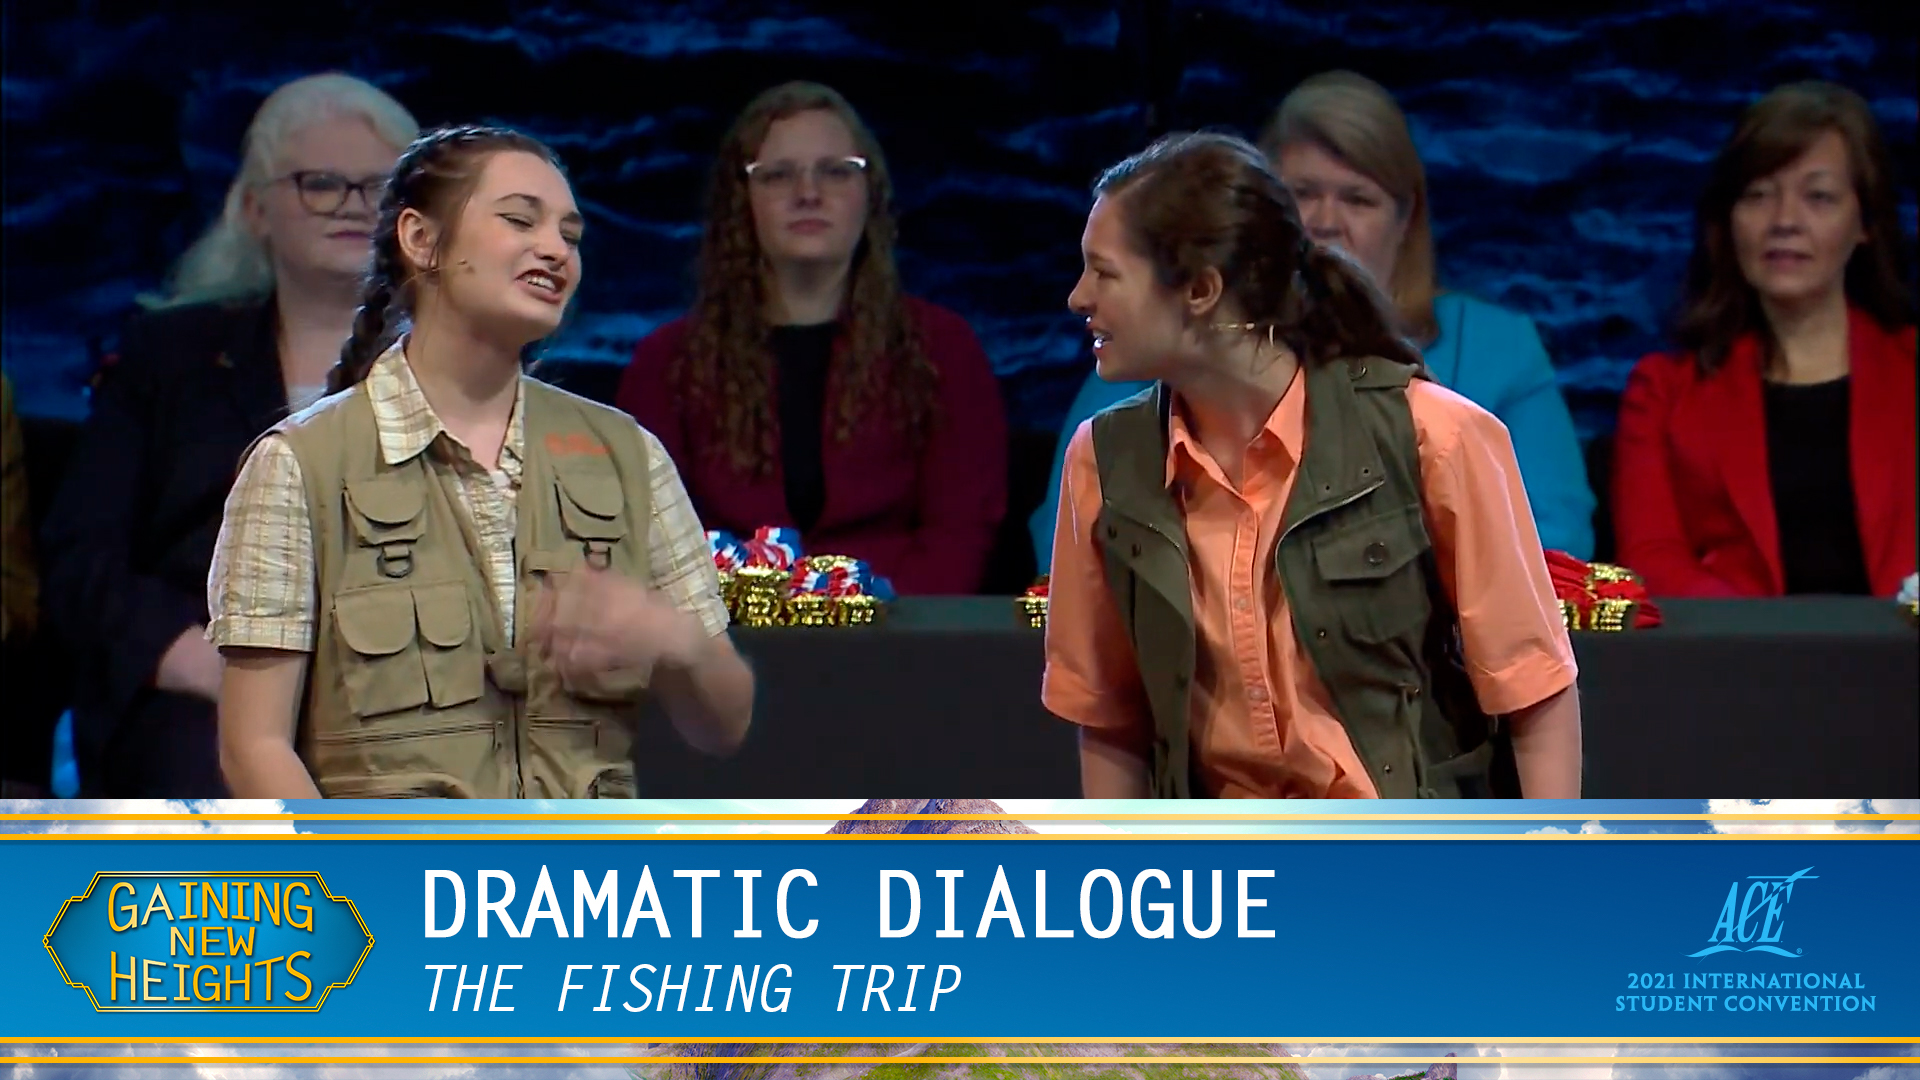 Dramatic Dialogue, "The Fishing Trip" - ISC 2021